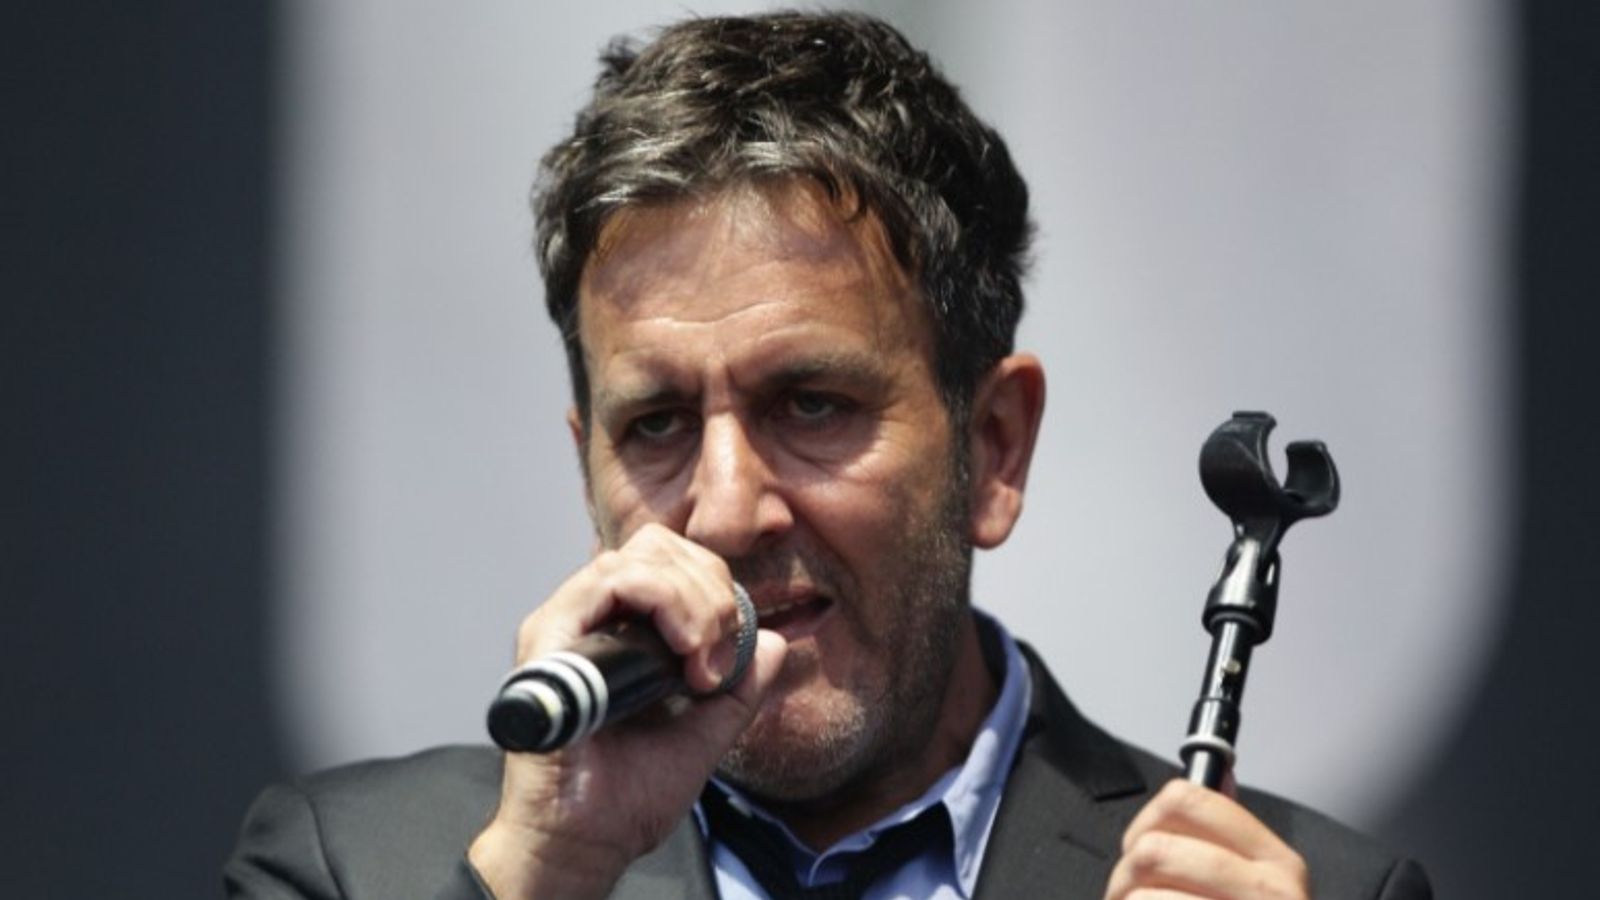 The Specials frontman Terry Hall dies aged 63